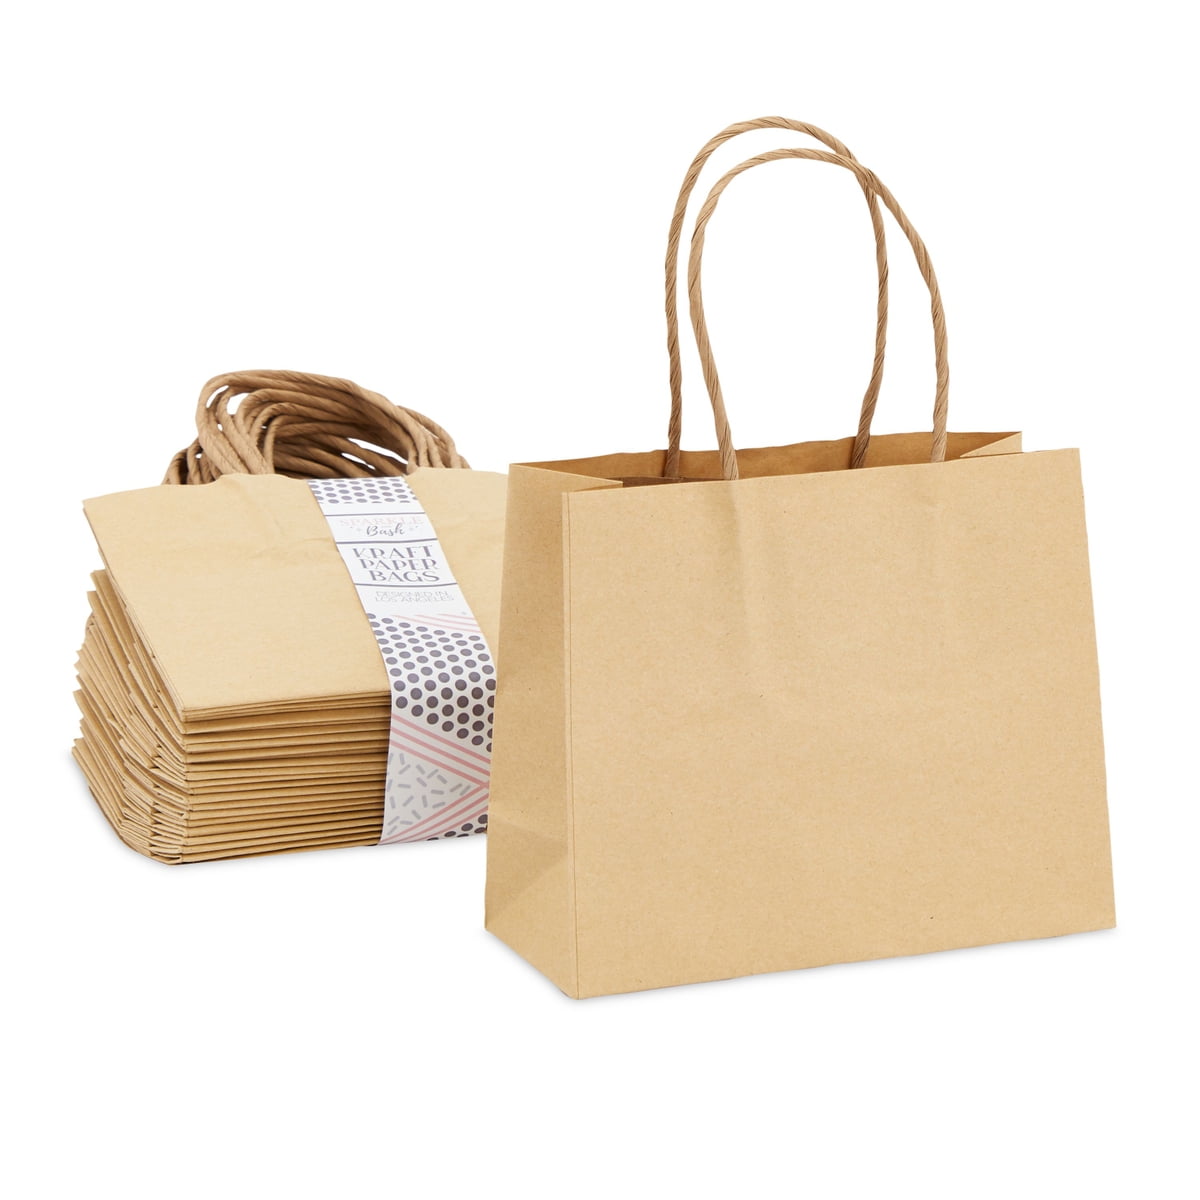 13" x 10" x 5" Green Stripes Paper Gift Bags with Handles Case of 250 